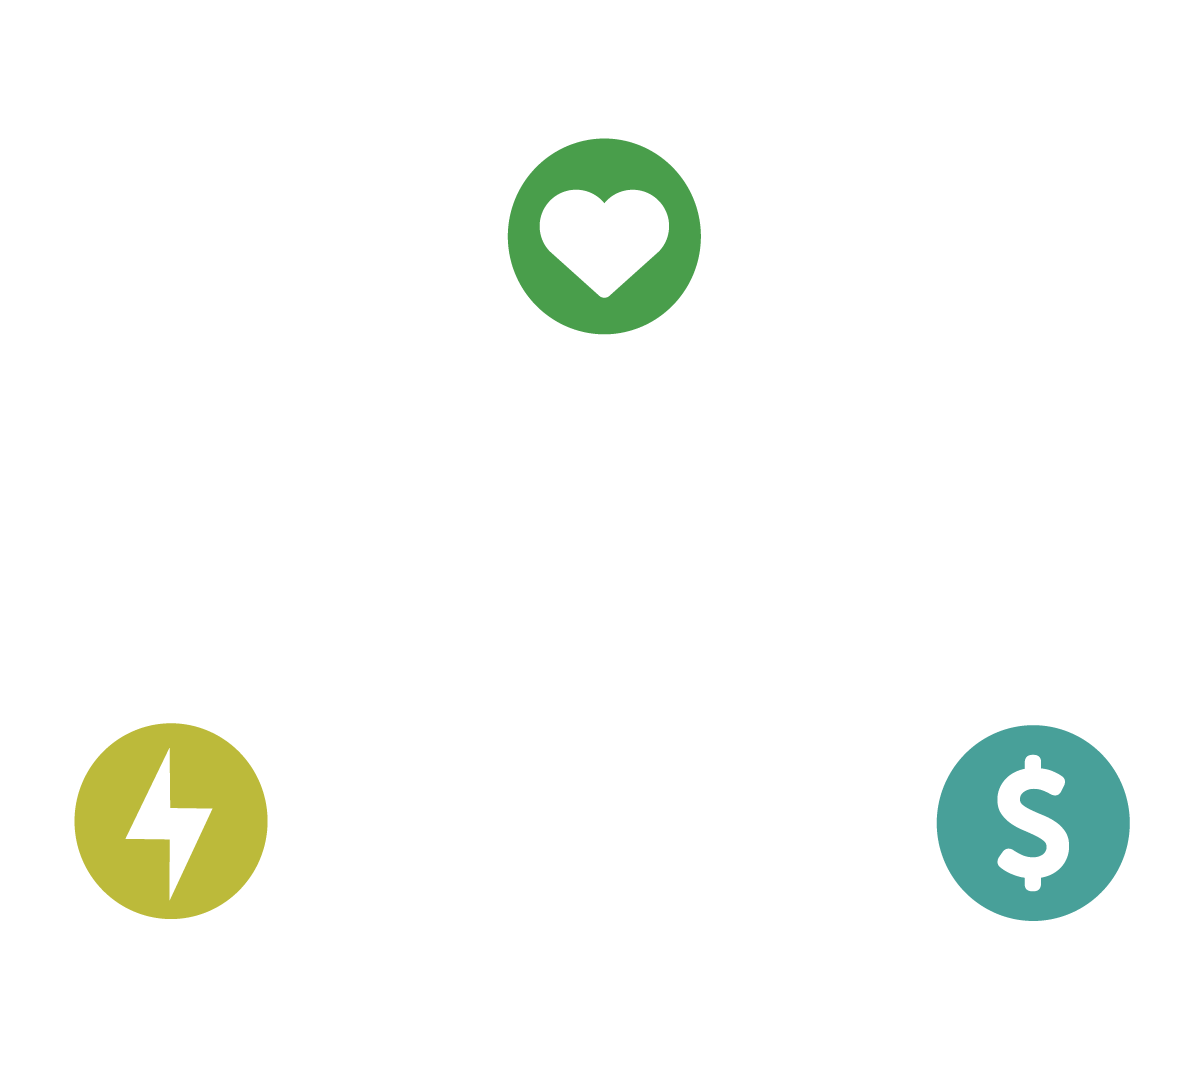 Passion, energy and pay surround Your Talent Within